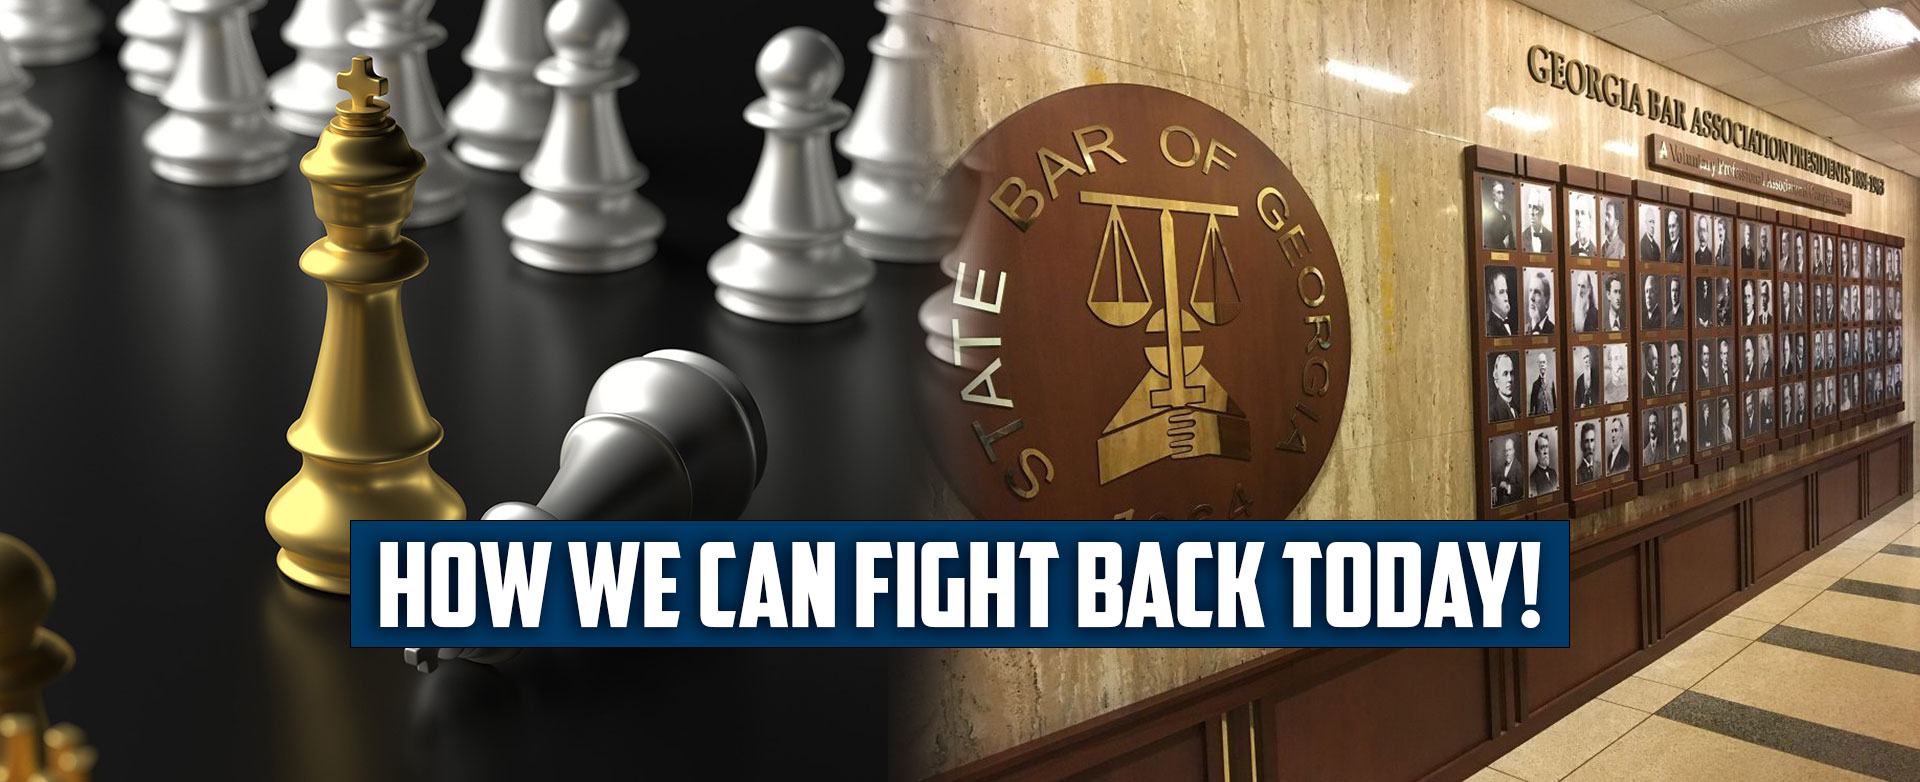 MyPatriotsNetwork-One Simple Way We Can Fight Back Today – February 4, 2021 Update